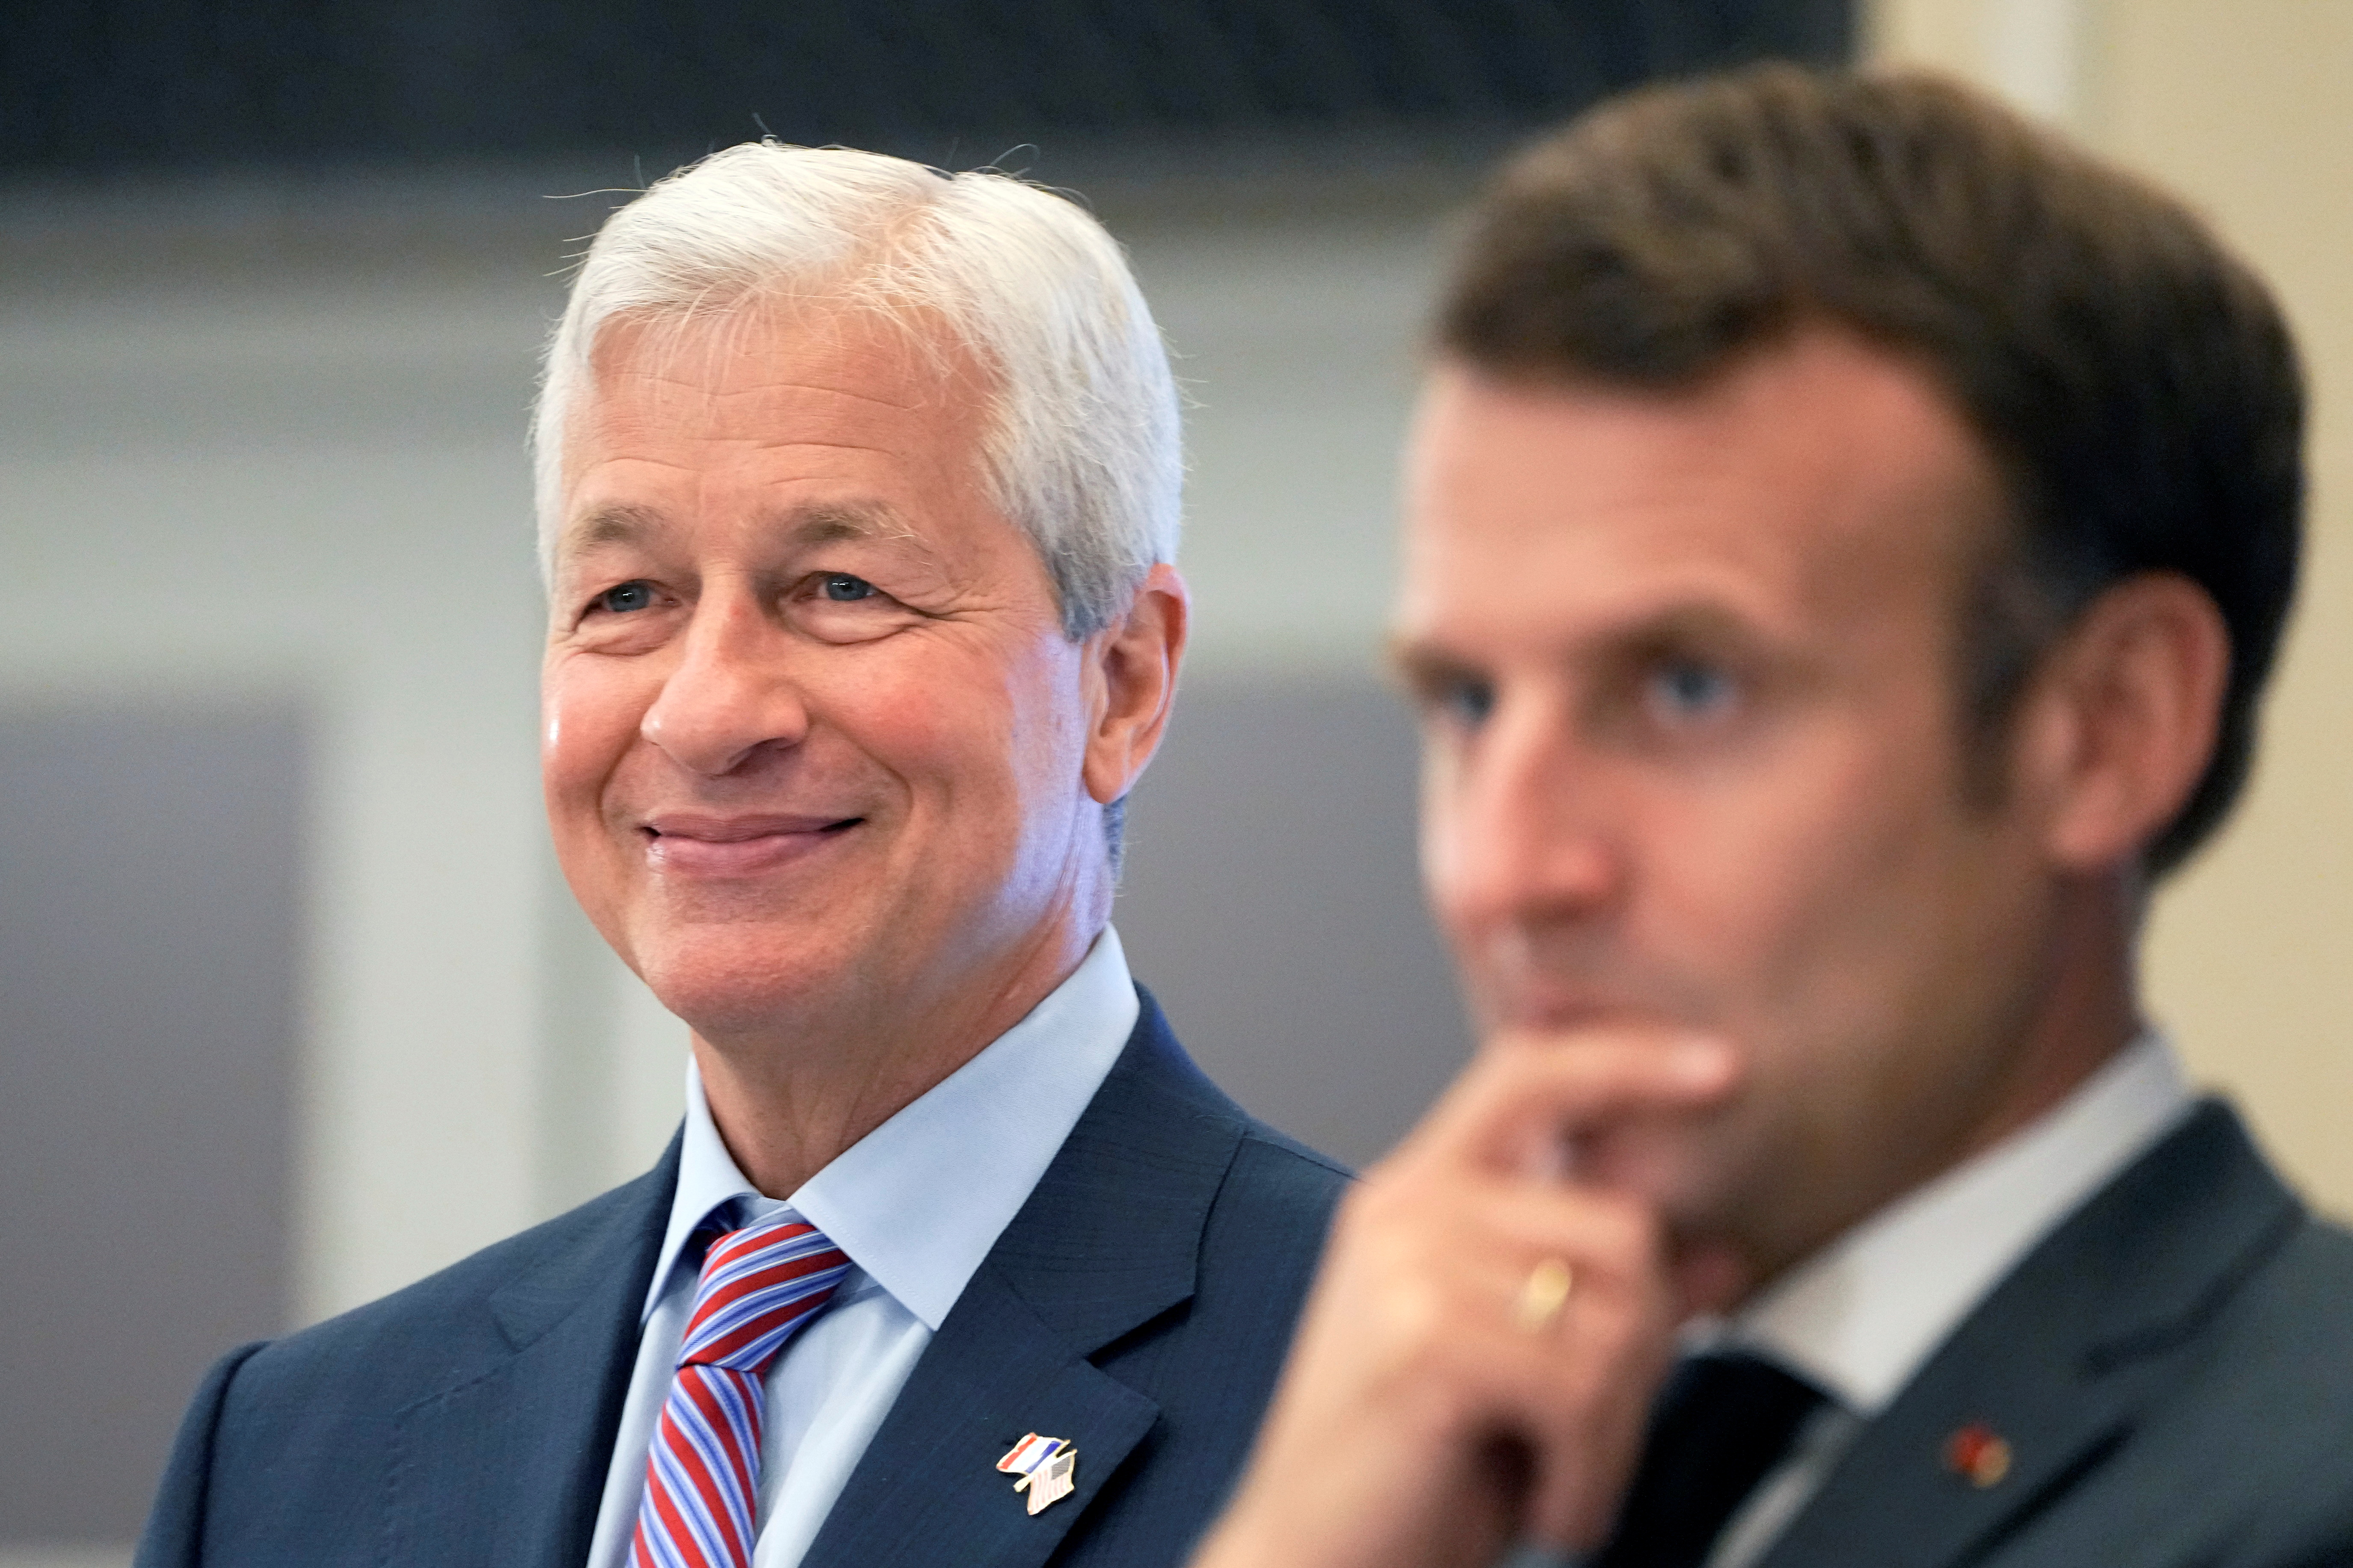 JP Morgan CEO Jamie Dimon and French President Emmanuel Macron listen as they inaugurate the new French headquarters of JP Morgan bank in Paris